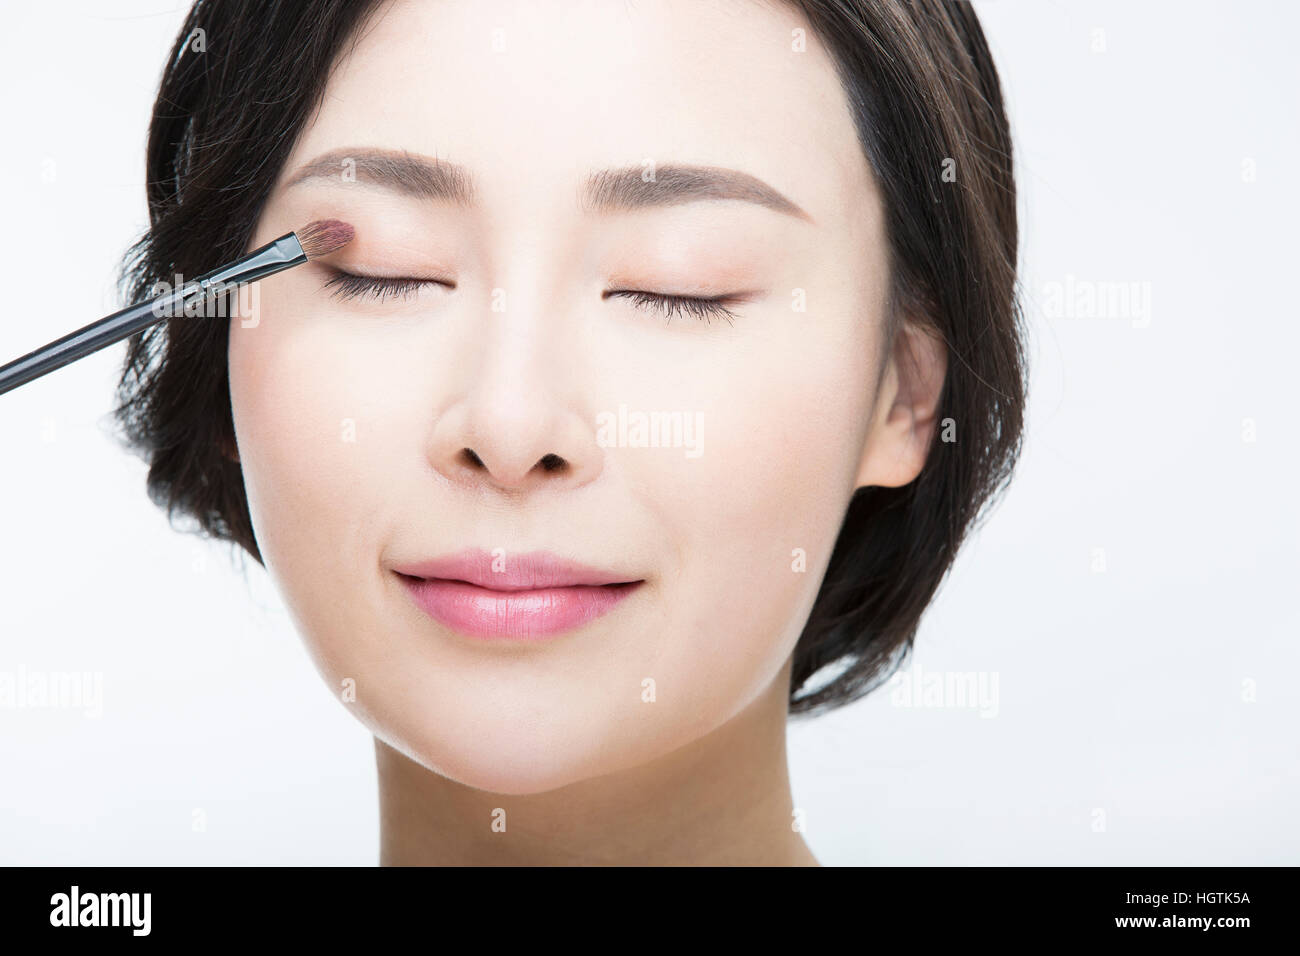 Portrait of young woman putting on makeup with her eyes closed Stock Photo